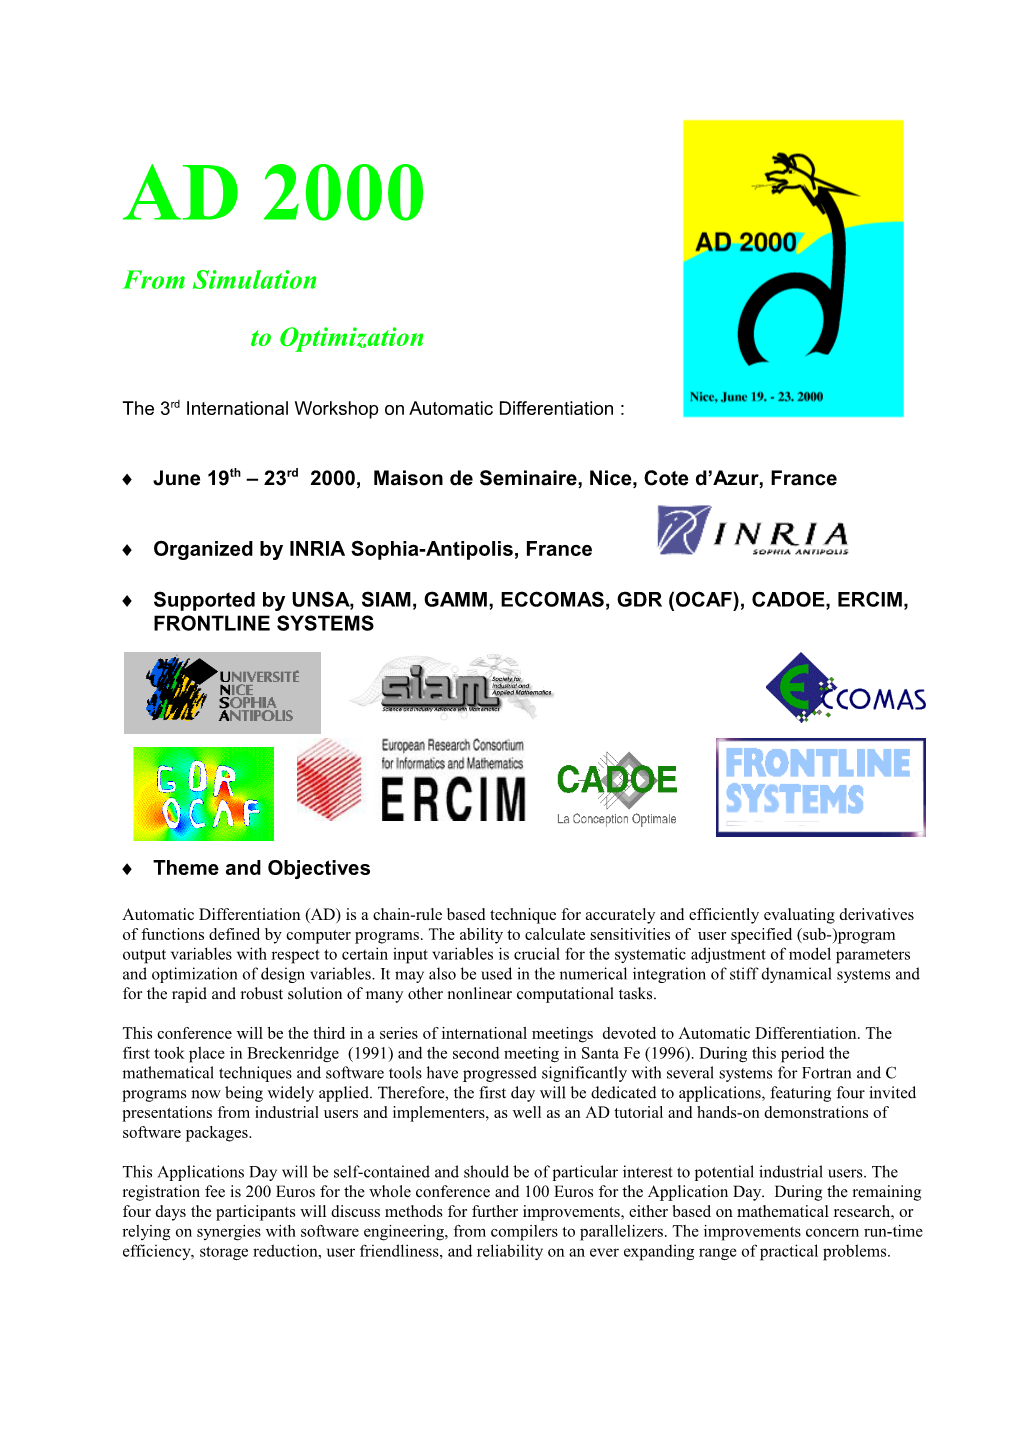 The 3Rd International Workshop on Automatic Differentiation